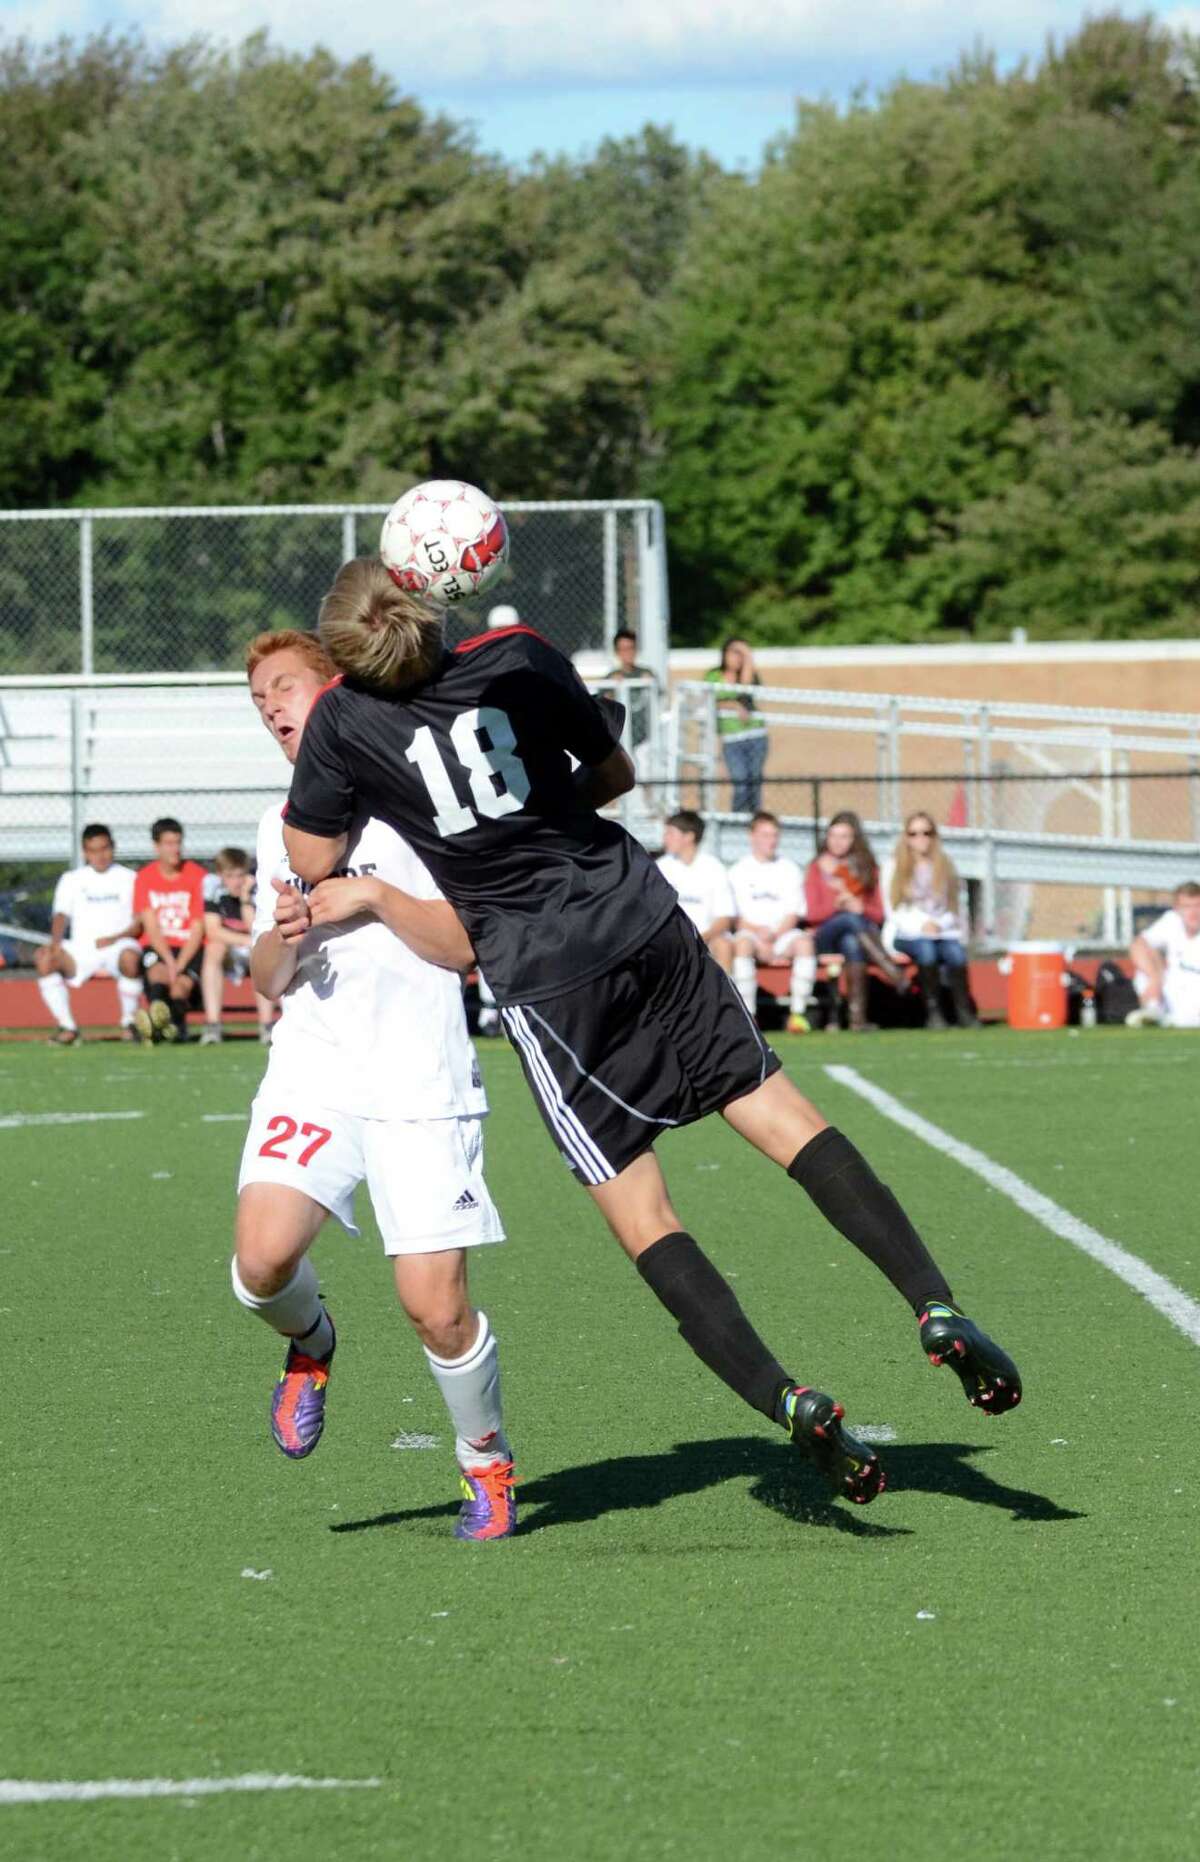 New Canaan's Eben Jones (18) goes up for a header against Warde's Alex Landau (27) during the boys soccer game at Tetreau/Davis field at Fairfield Warde High School on Monday, Sept. 24, 2012.